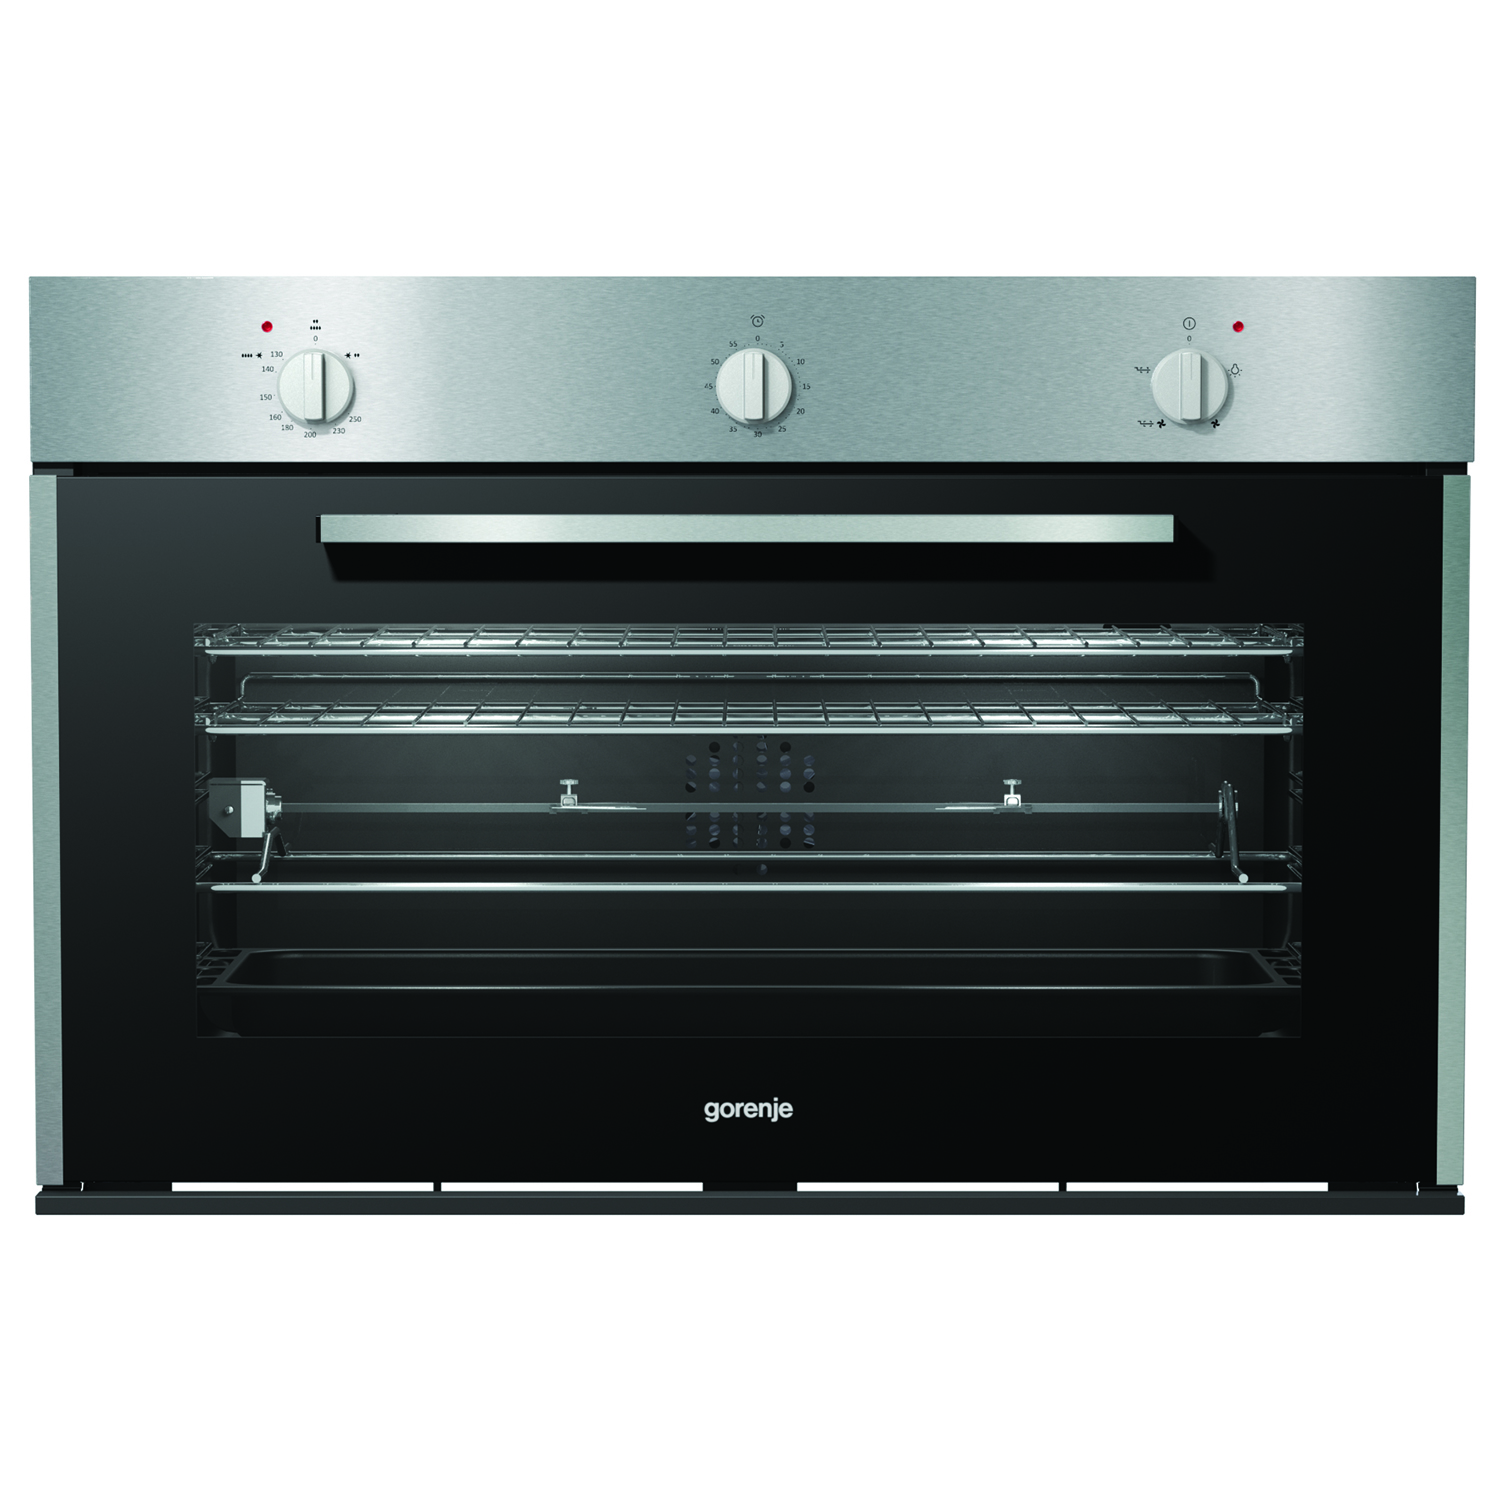 BOG922E00FX - Gorenje Gas oven 90 cm with gas grill, stainless steel BOG922E00FX